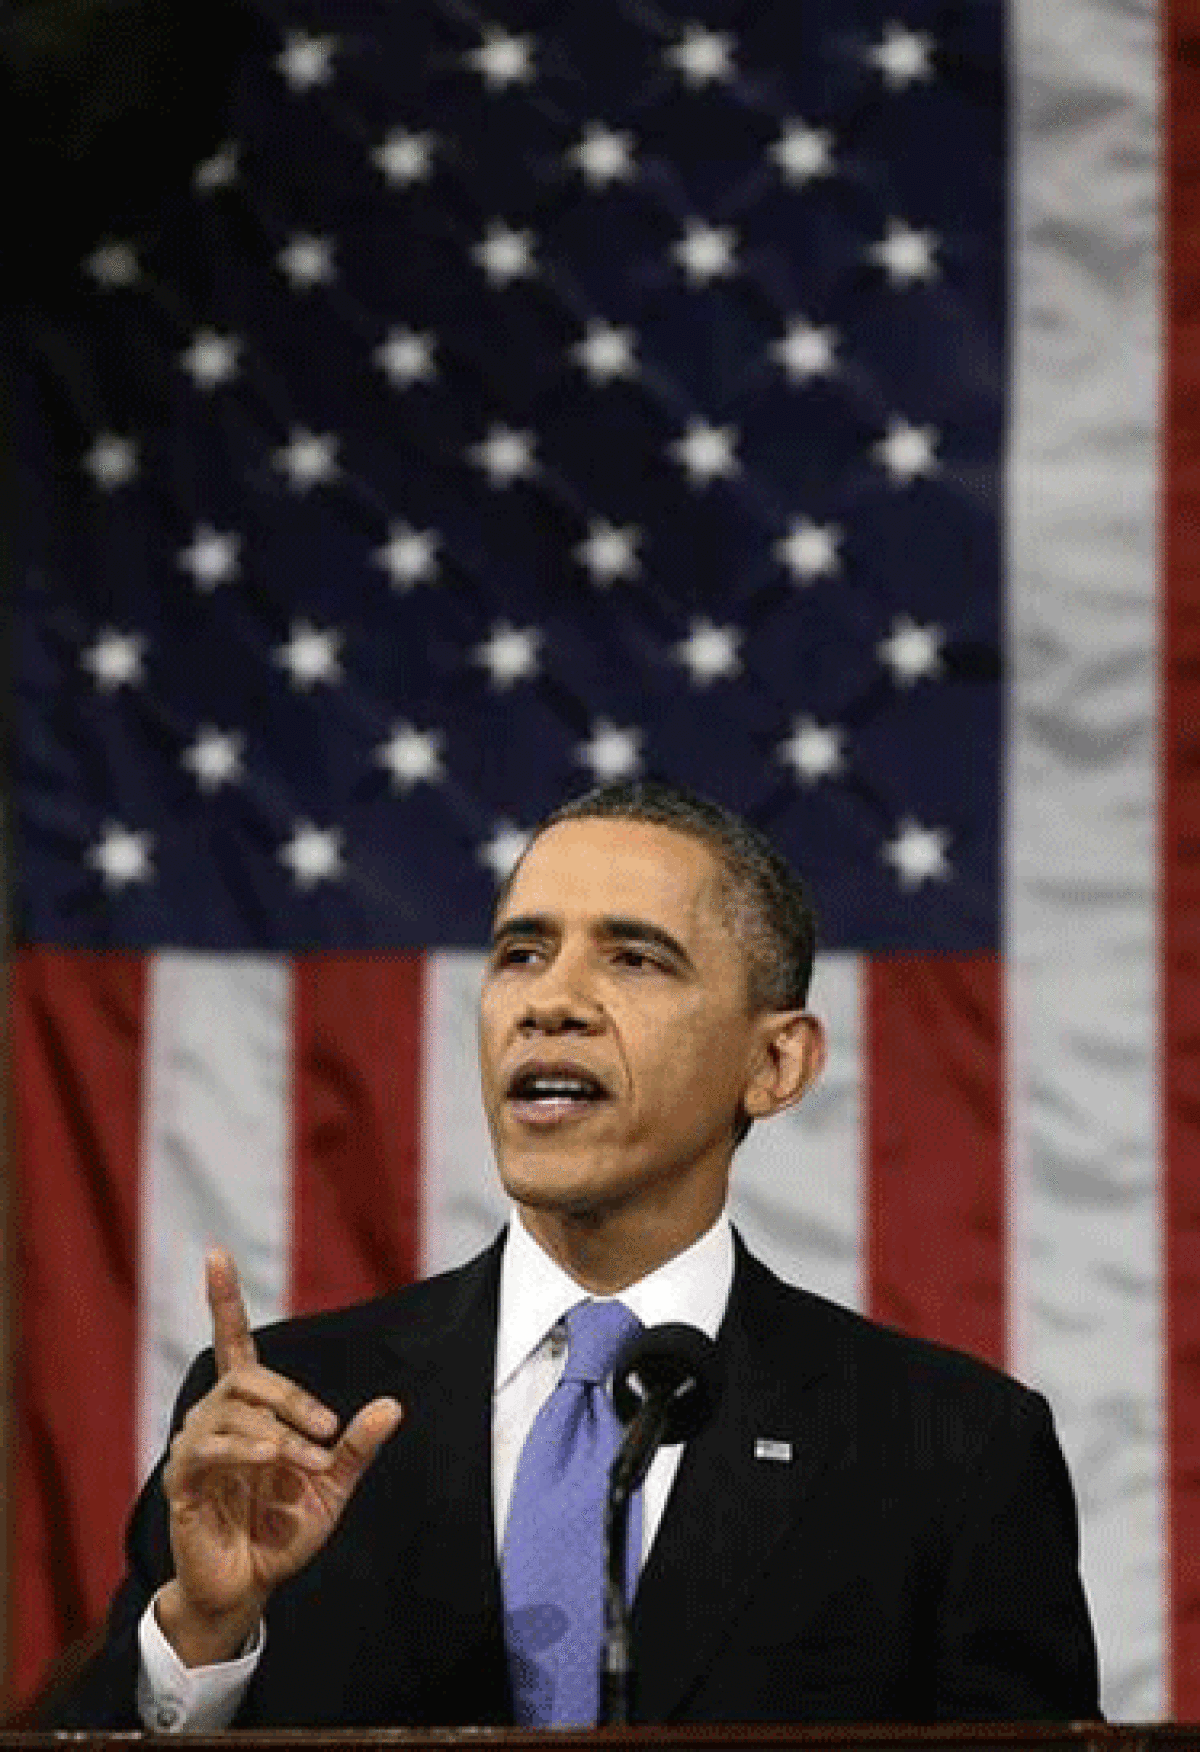 During his State of the Union address earlier this year, President Obama called for a higher federal minimum wage.